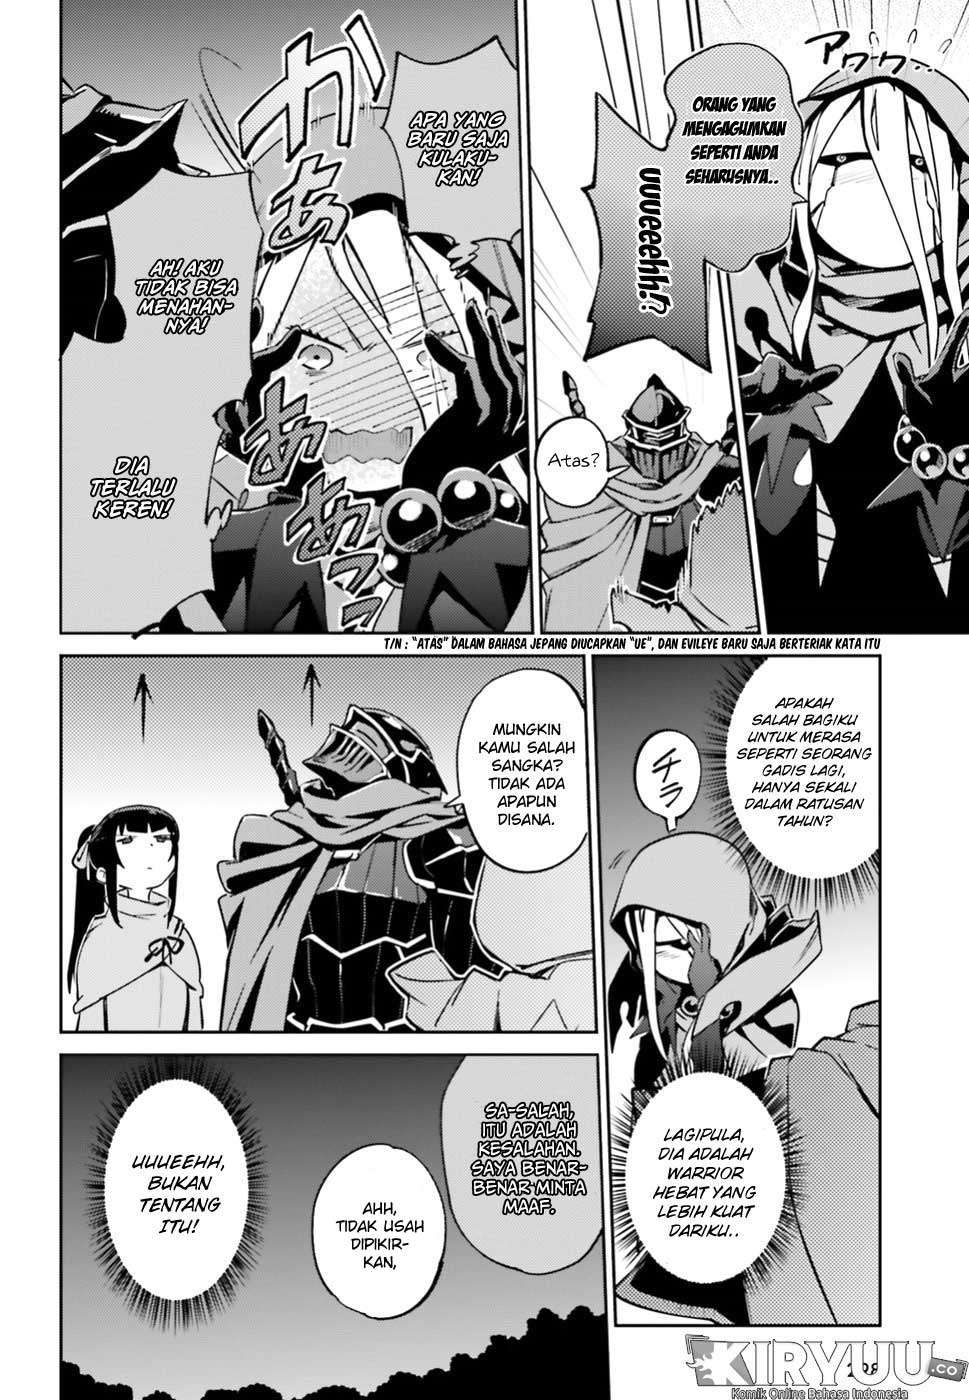 Overlord Chapter 47 26